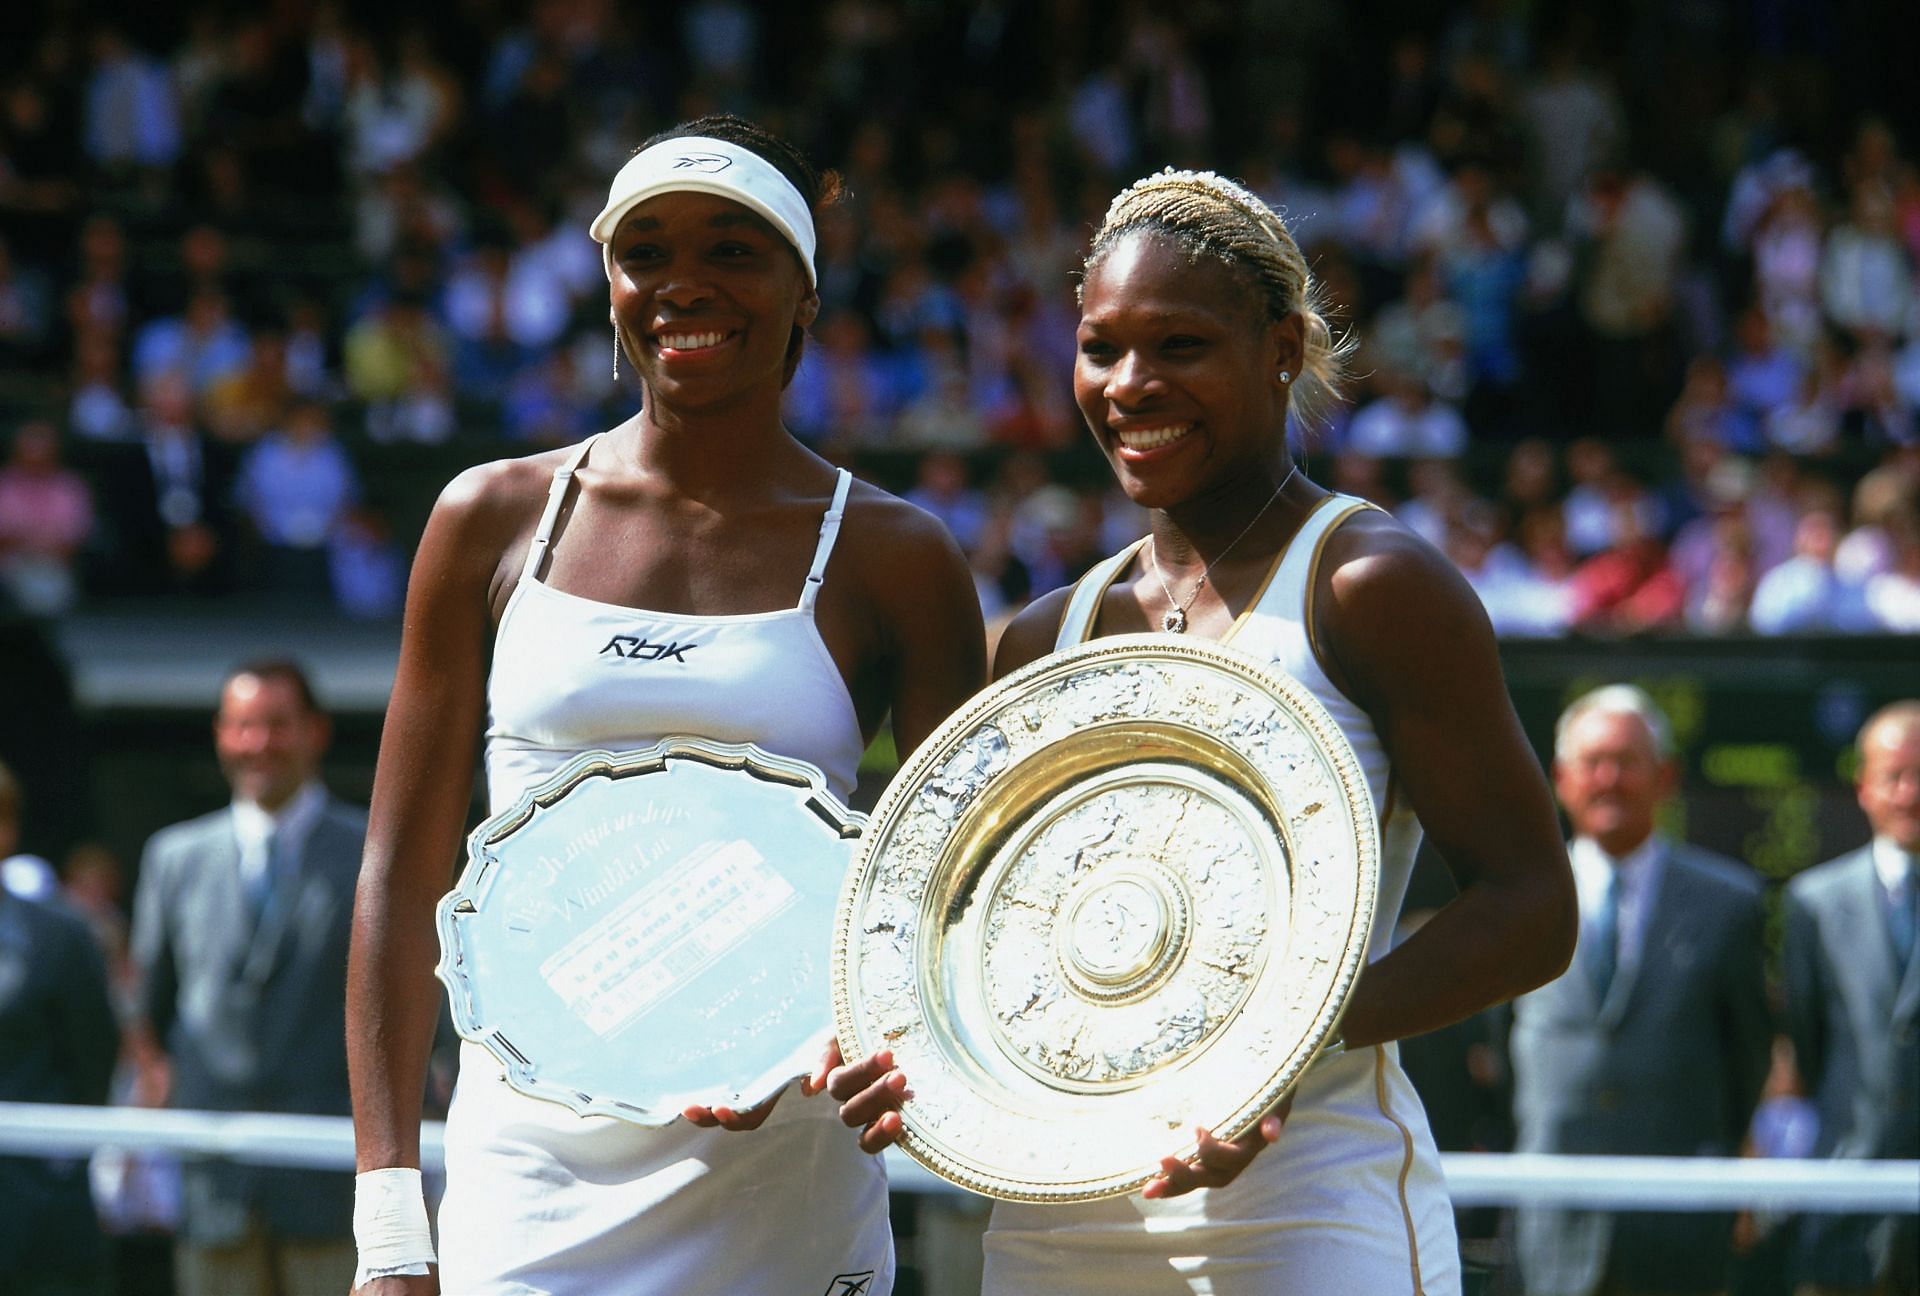 Wimbledon Ladies champion Serena Williams (right) of the USA poses with the winning trophy with runner-up and sister Venus Williams of the USA